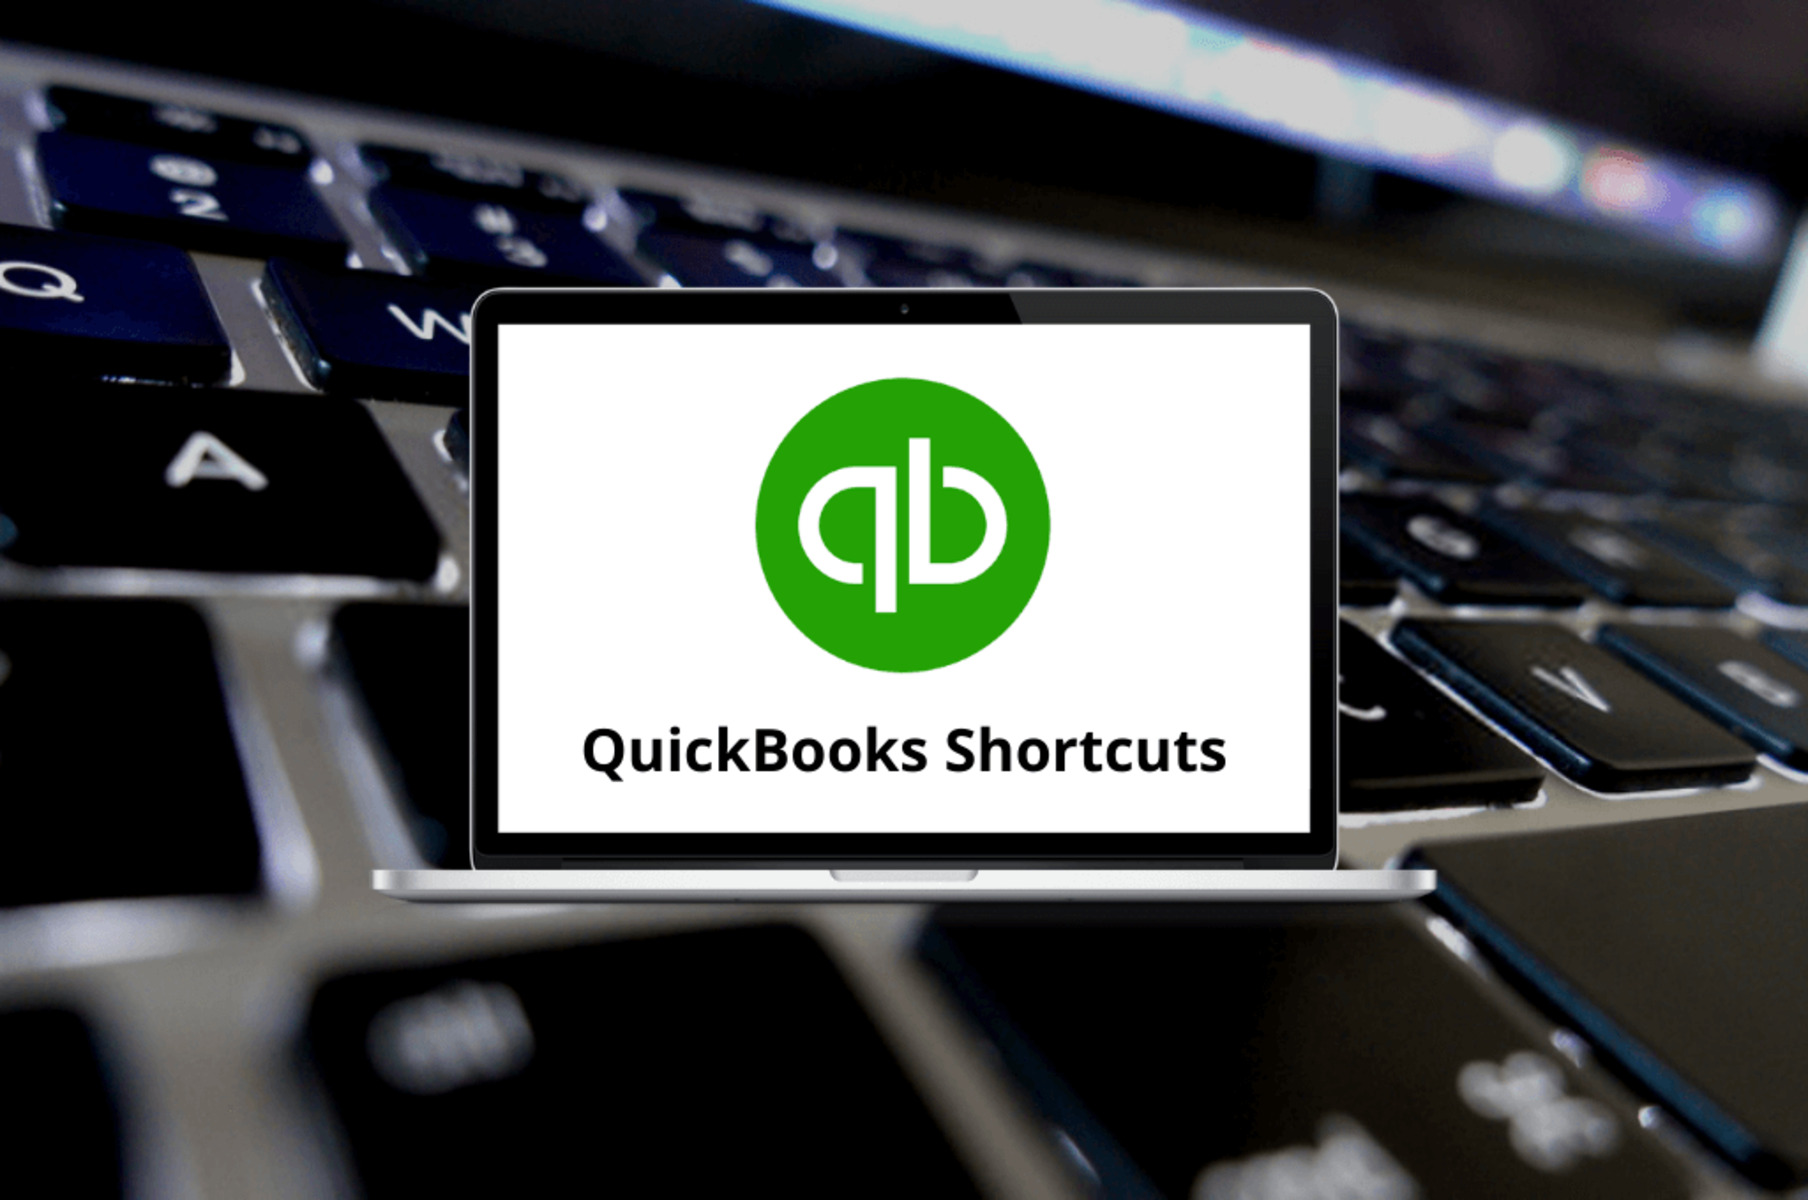 How To Place A Link To Quickbooks From Server To Workstation